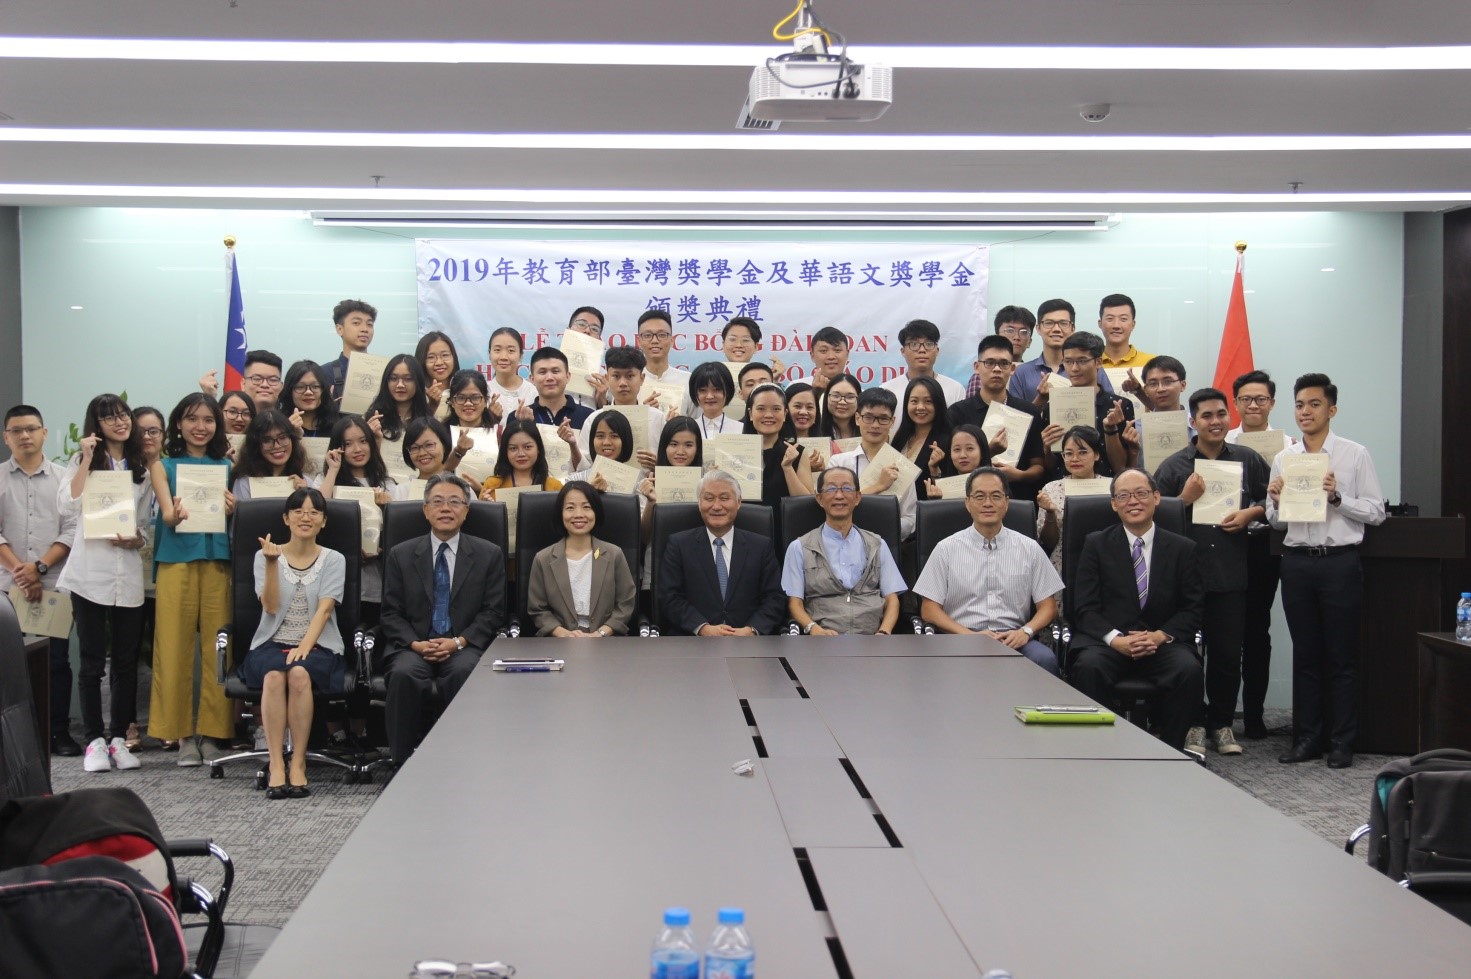 TECO in Vietnam Awards 2019 Ministry of Education Taiwan Scholarships and Huayu Enrichment Scholarships